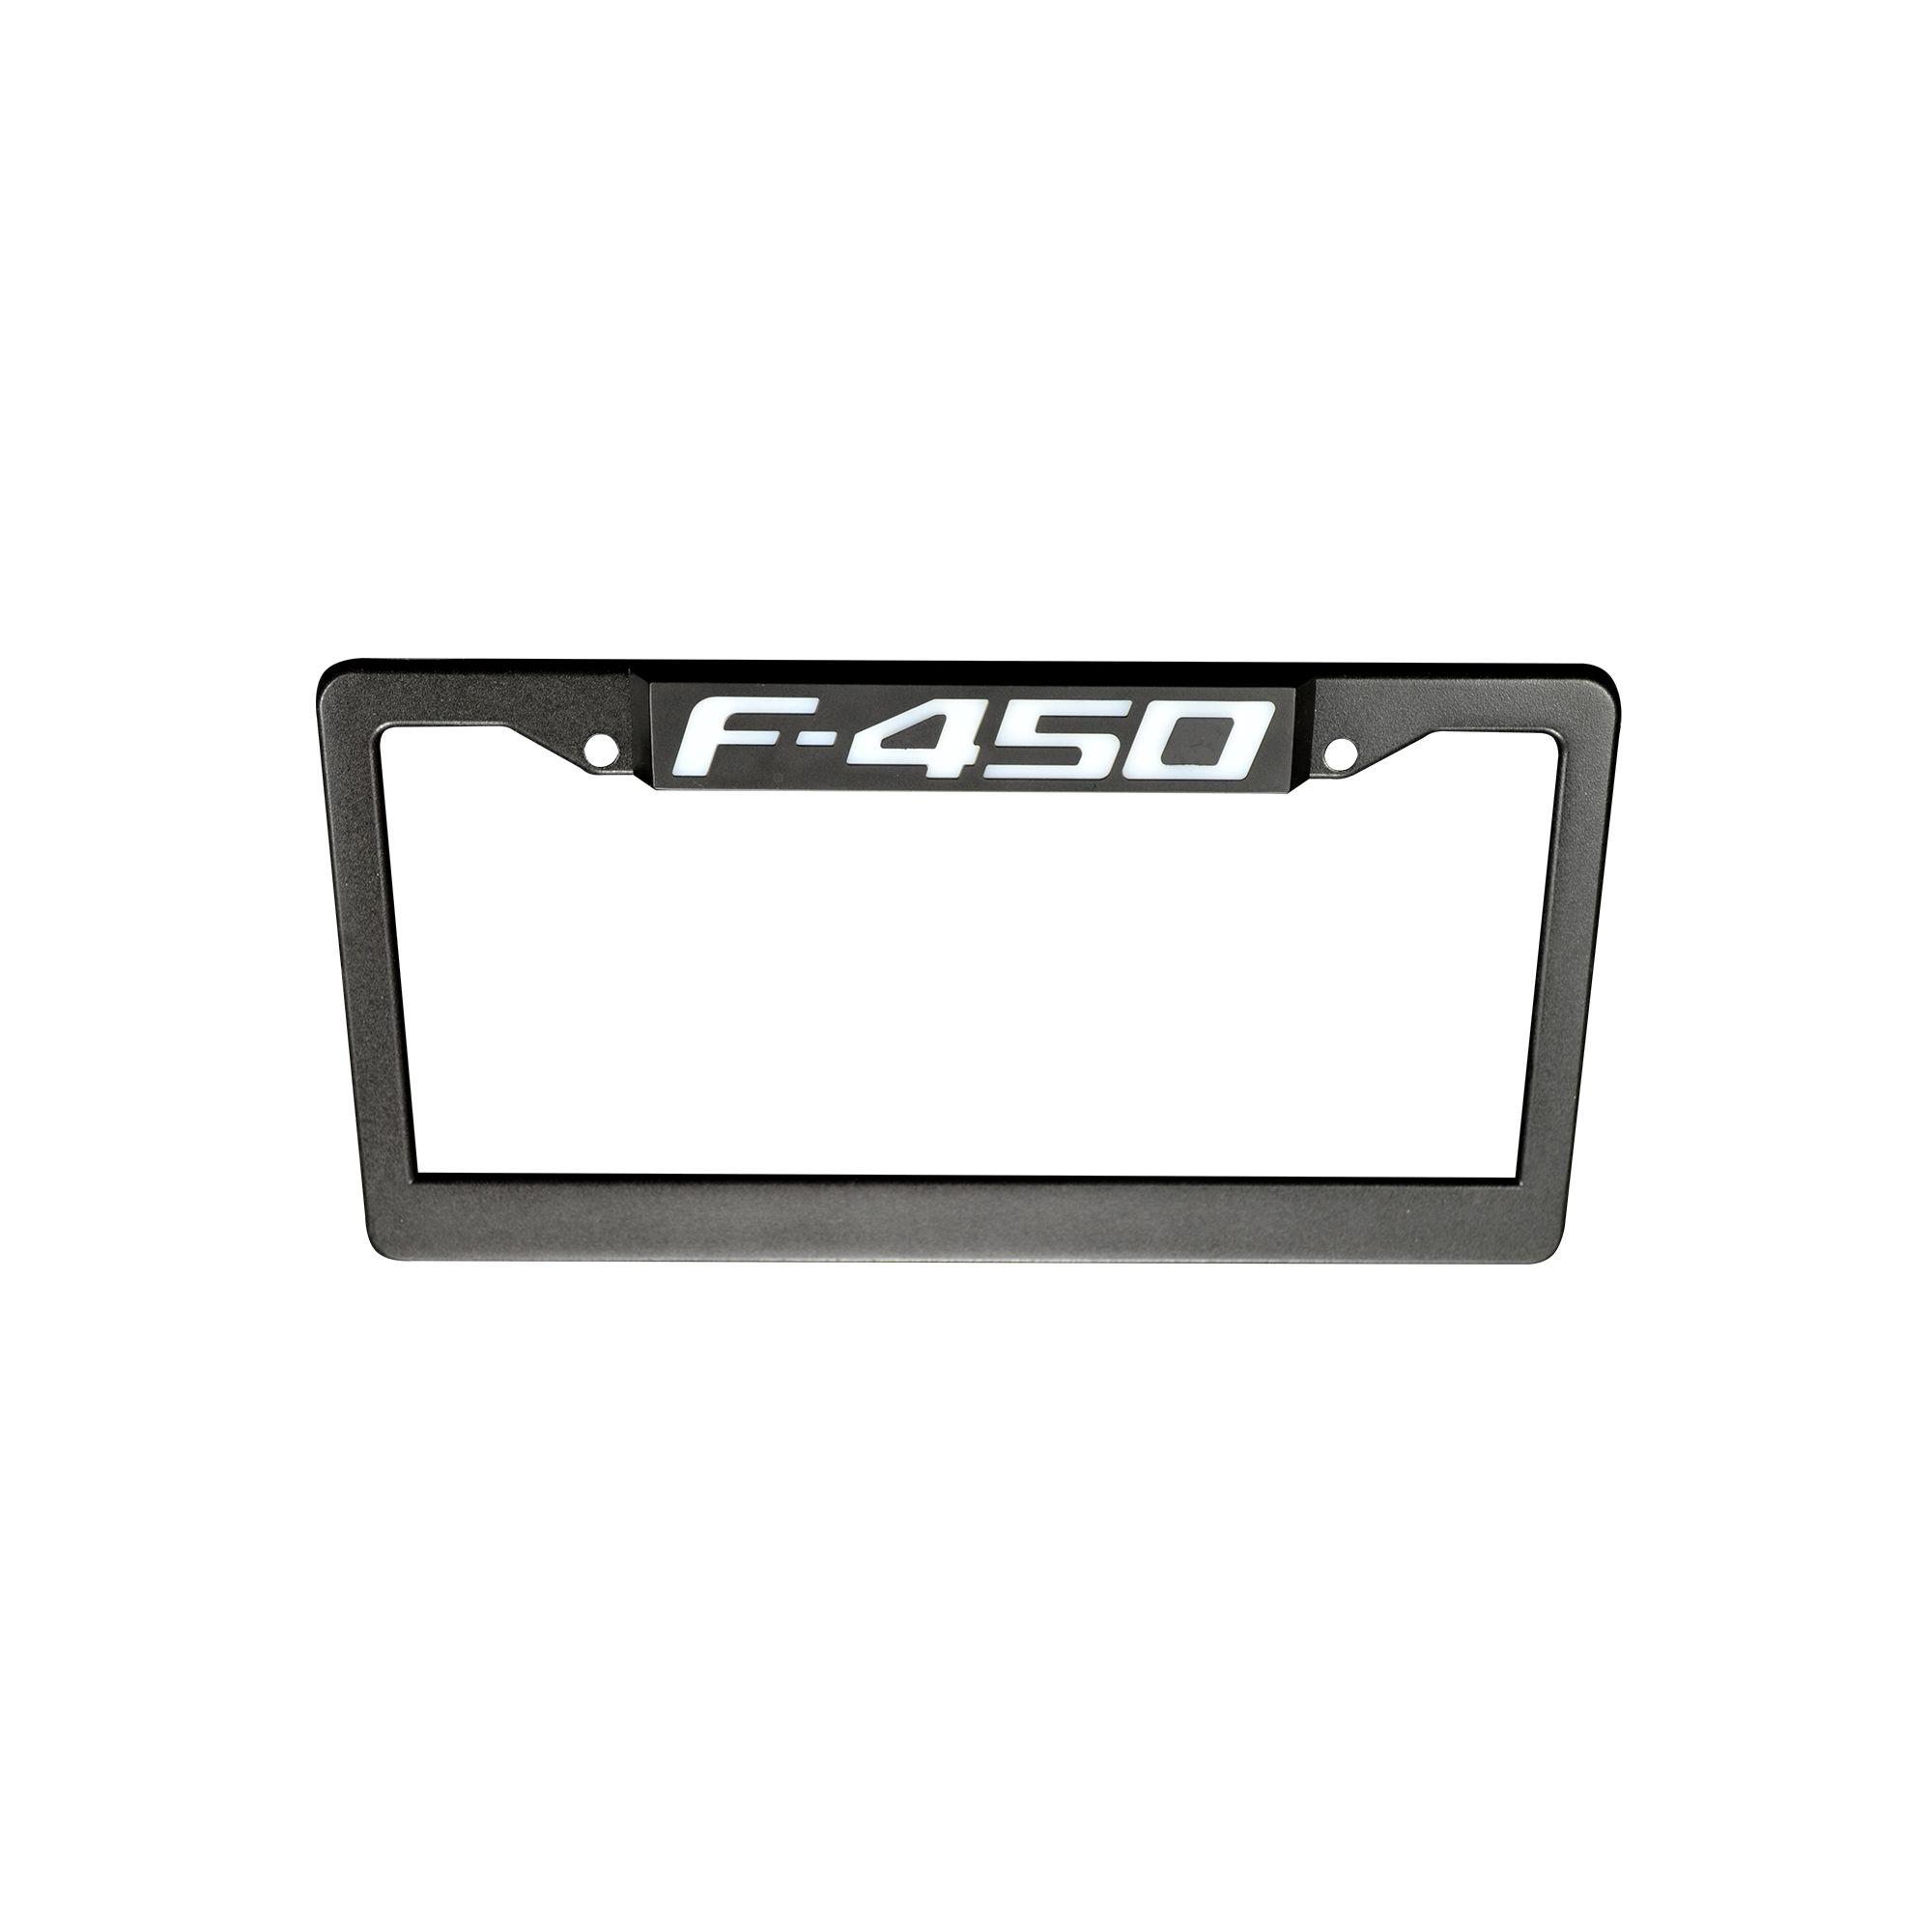 F-450 Logo - RECON 264311F450 Ford F-450 Logo Illuminated RED LED License Plate Frame in  Black Billet Aluminum - Fits All Ford F-450 Trucks